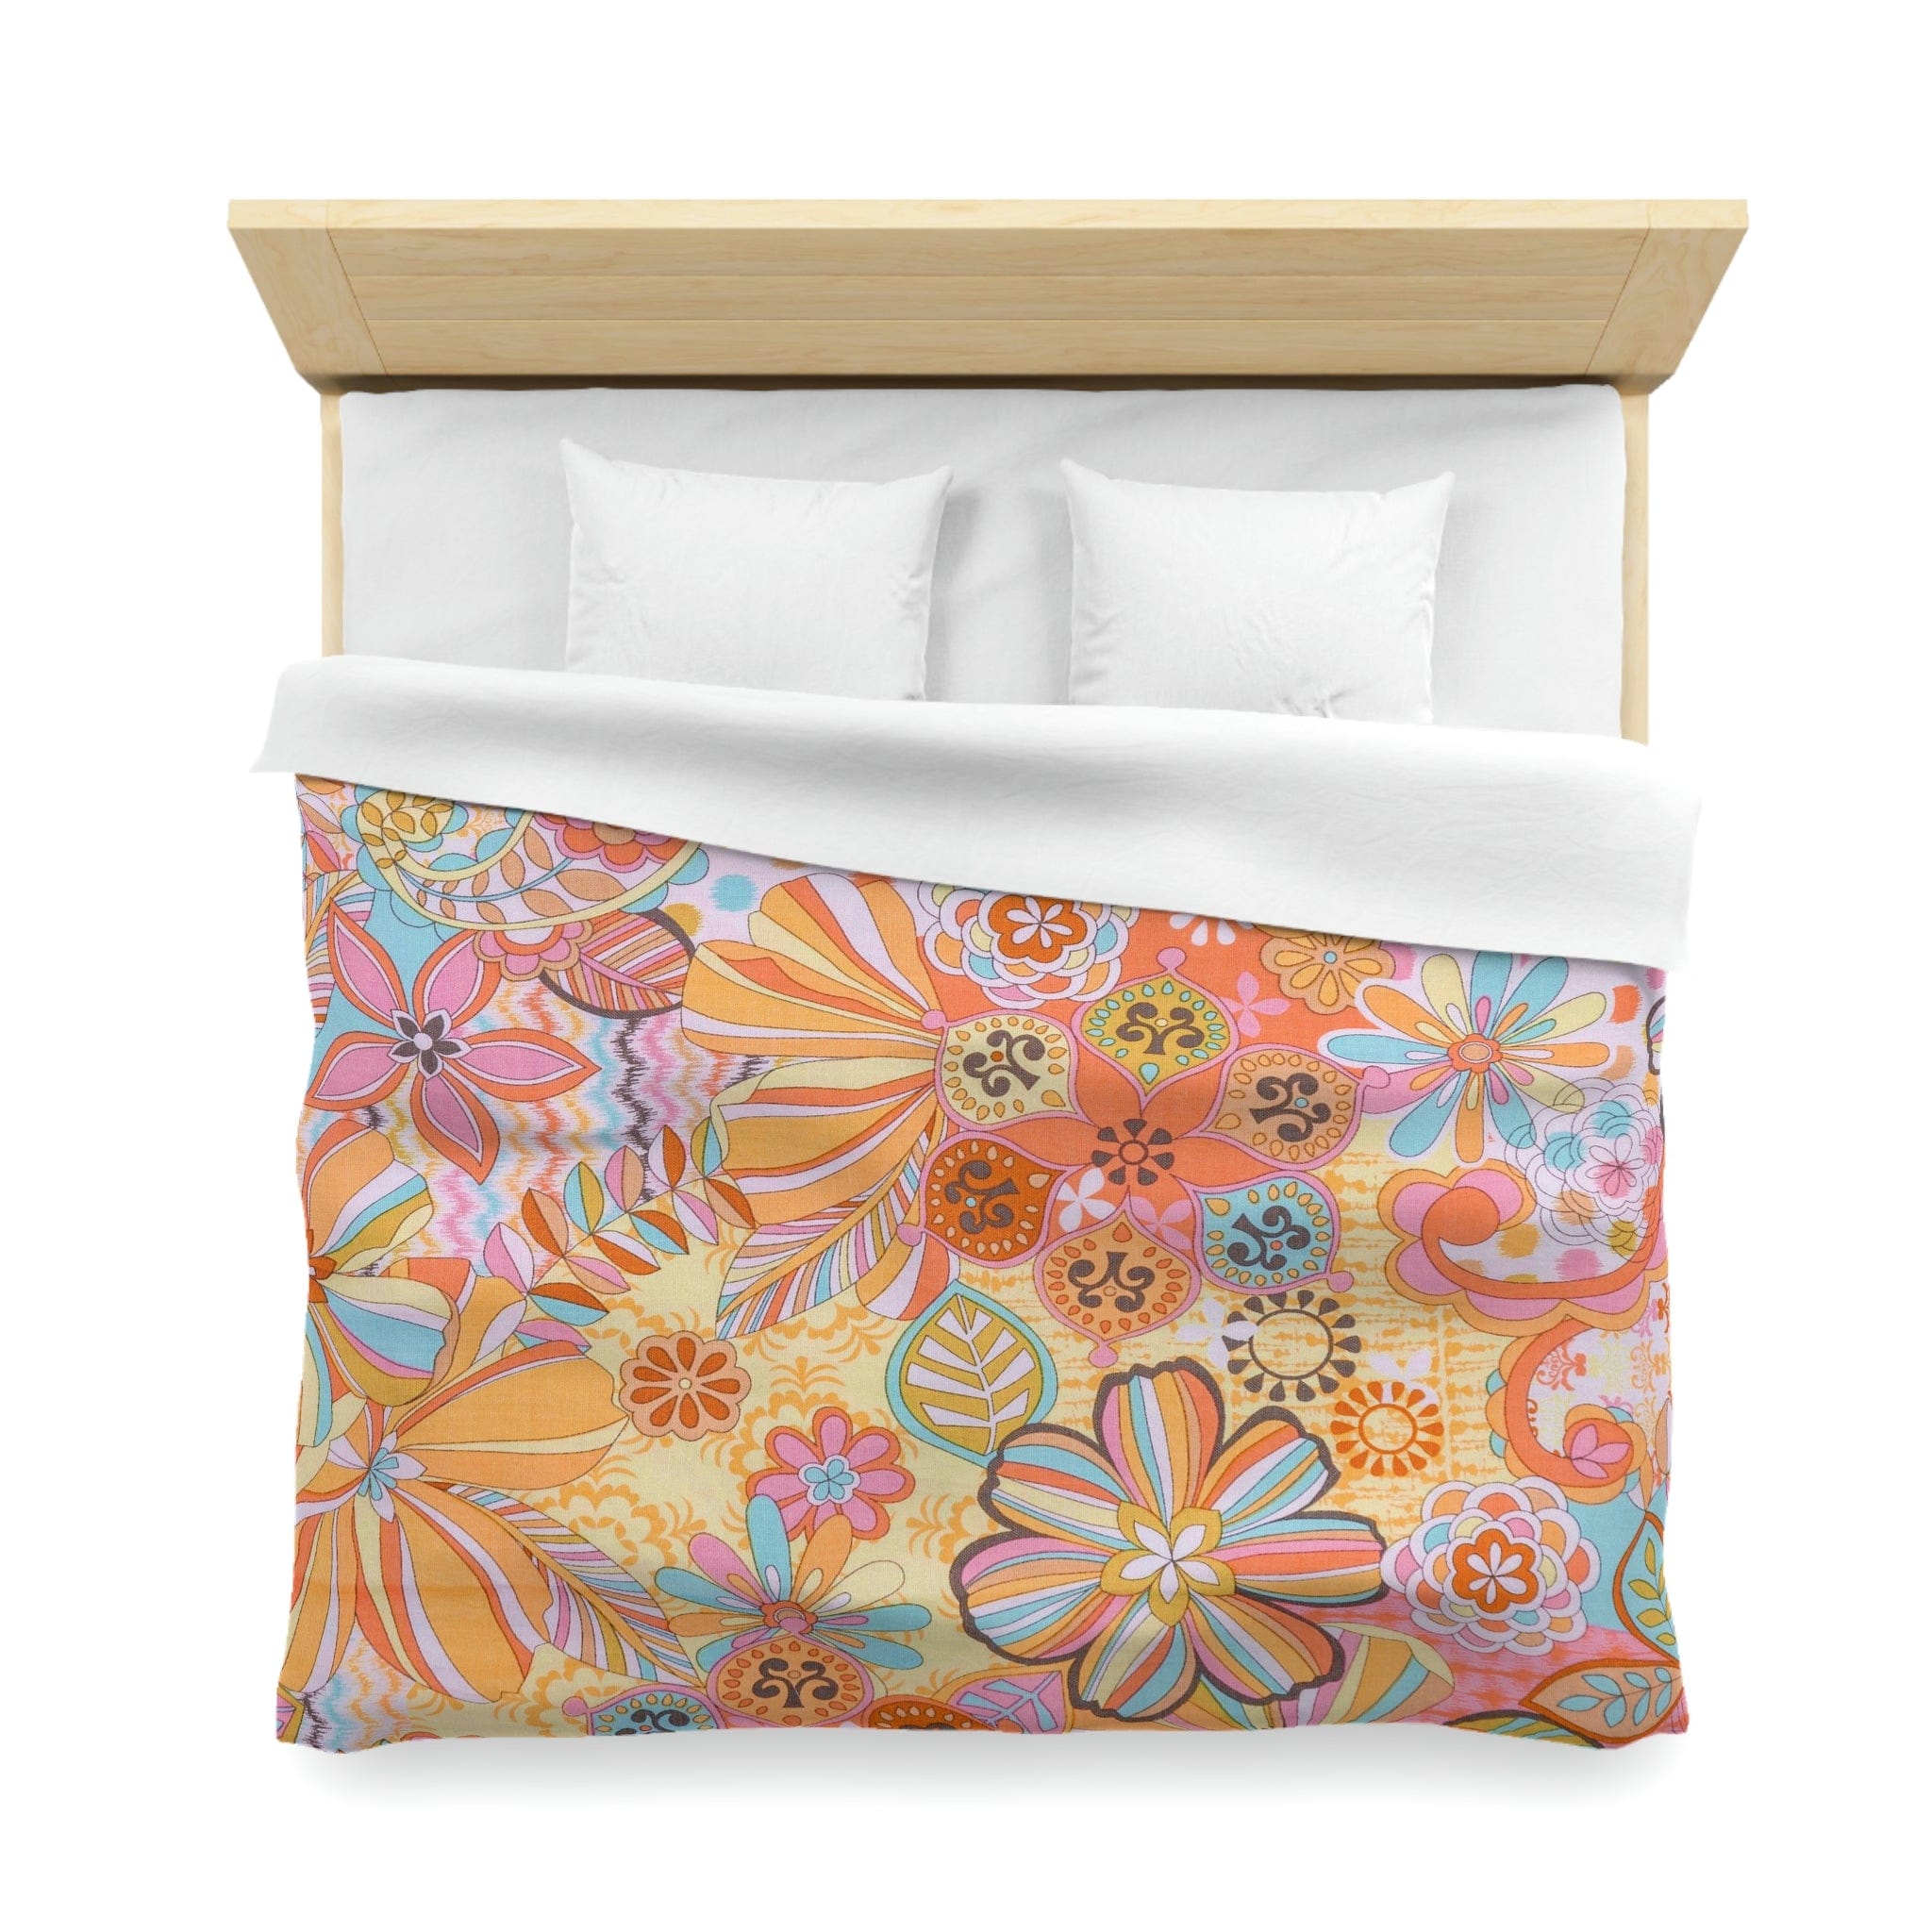 Kate McEnroe New York Retro Trippy Flower Power Duvet Cover, 70s Mid Mod Hippie Chic Floral Bedroom Decor with Groovy Orange, Yellow, and Blue PaletteDuvet Covers40332228668726911553